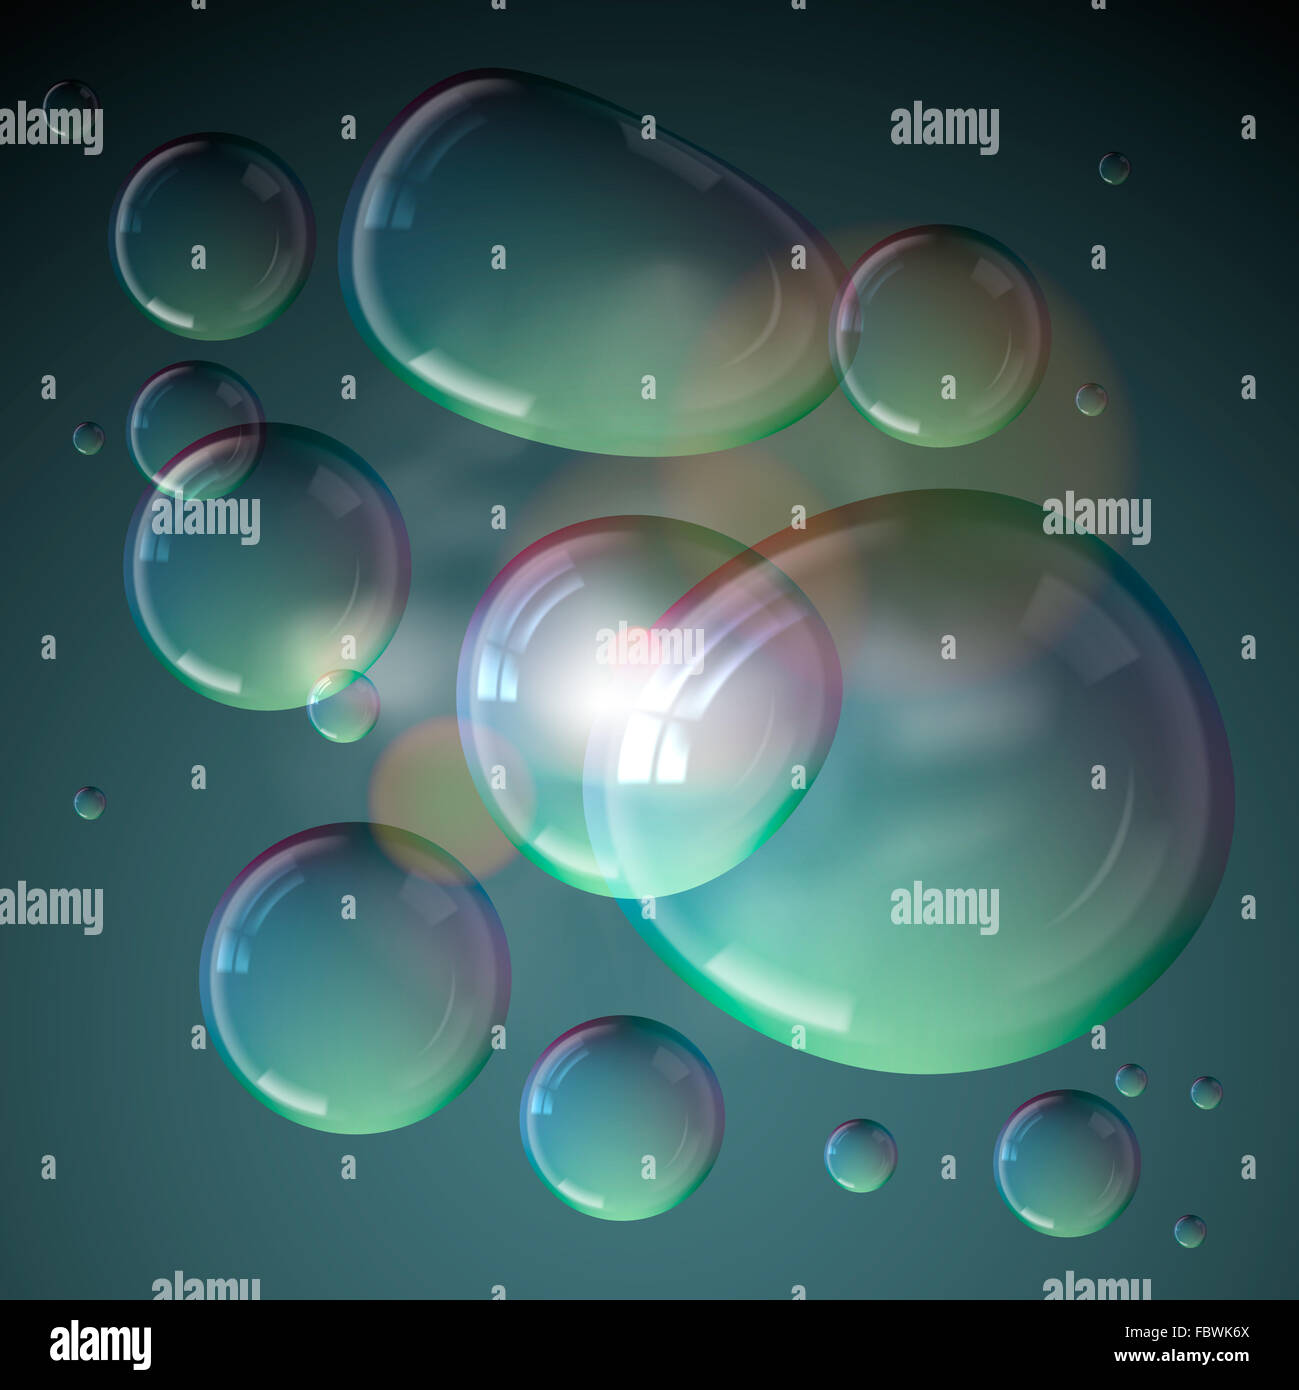 Soap bubbles isolated on grey background. Stock Photo